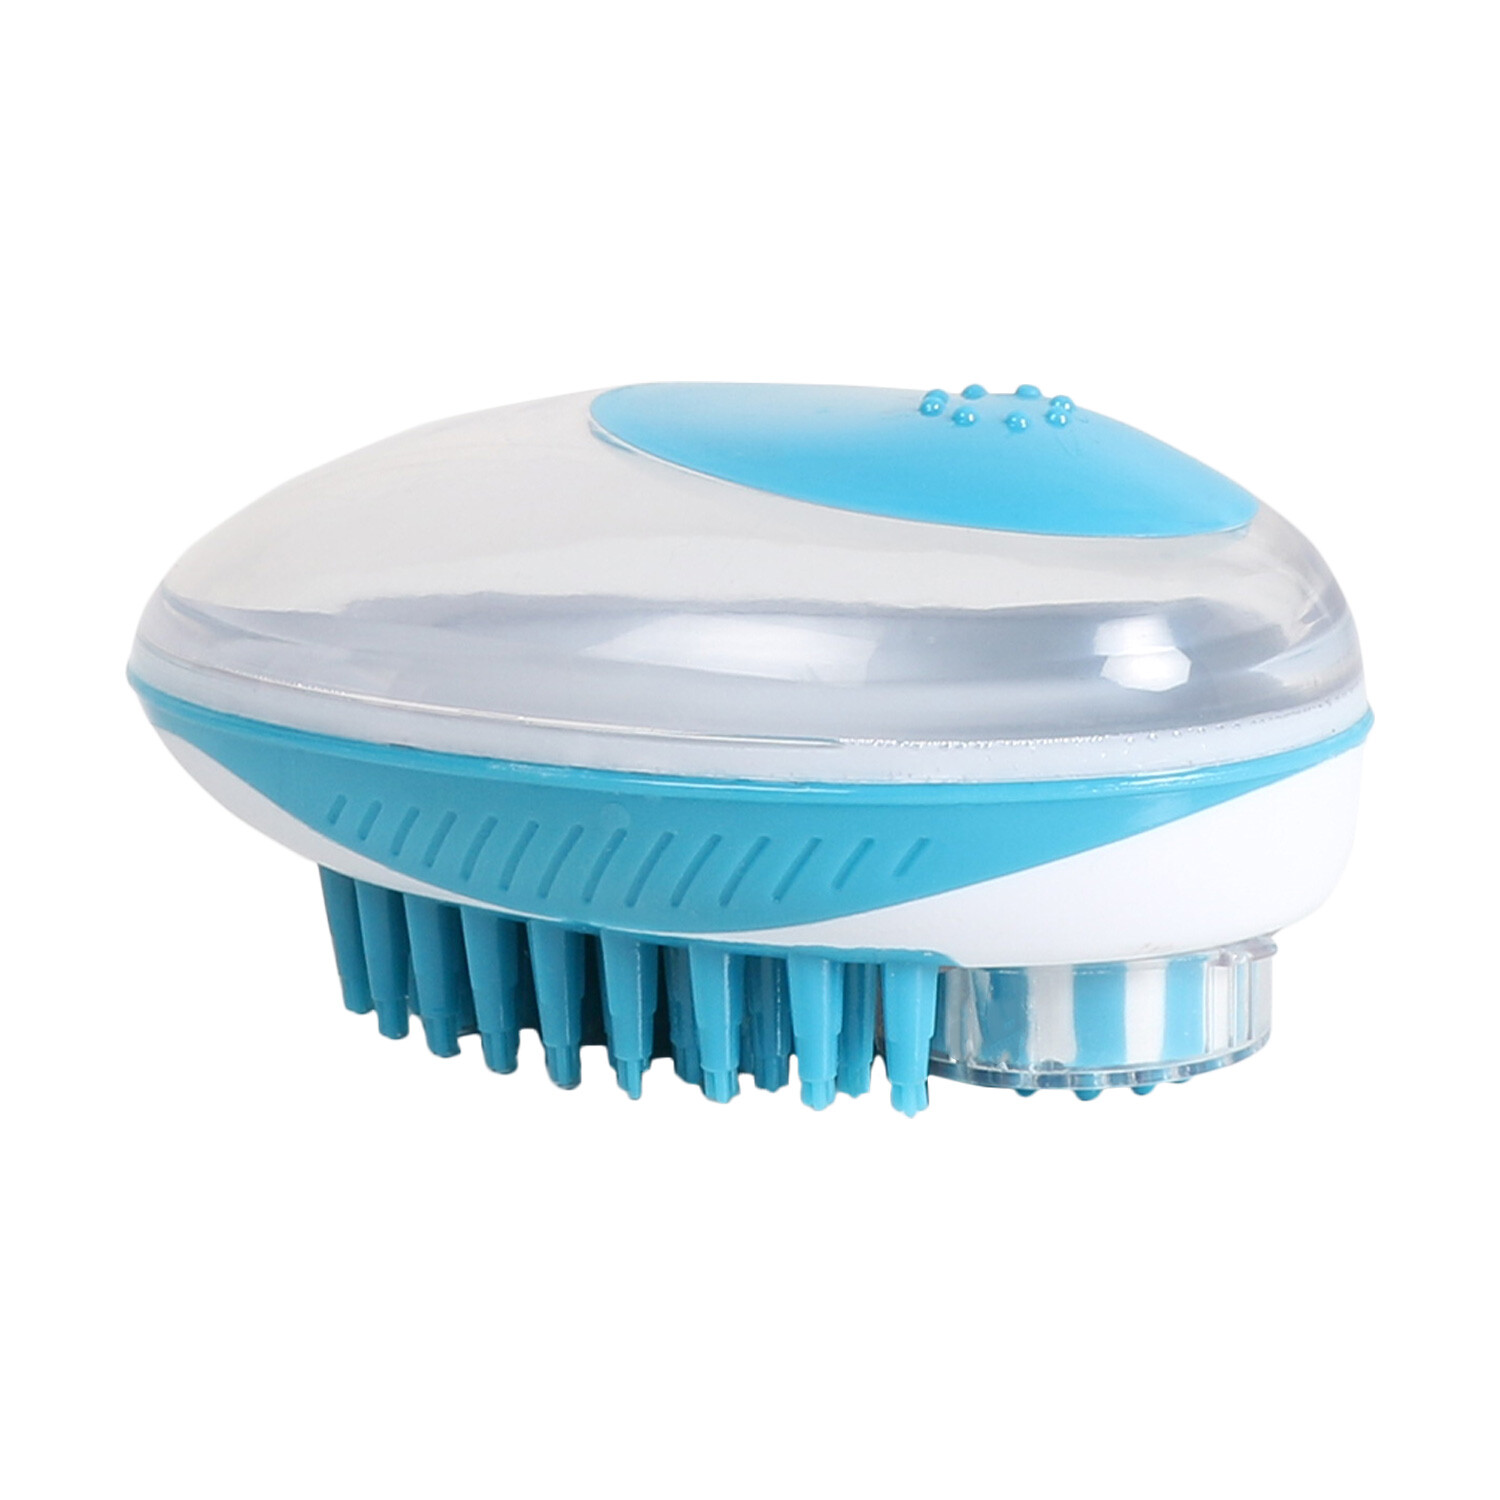 Single Clever Paws 2 in 1 Shampoo Grooming Brush in Assorted styles Image 1